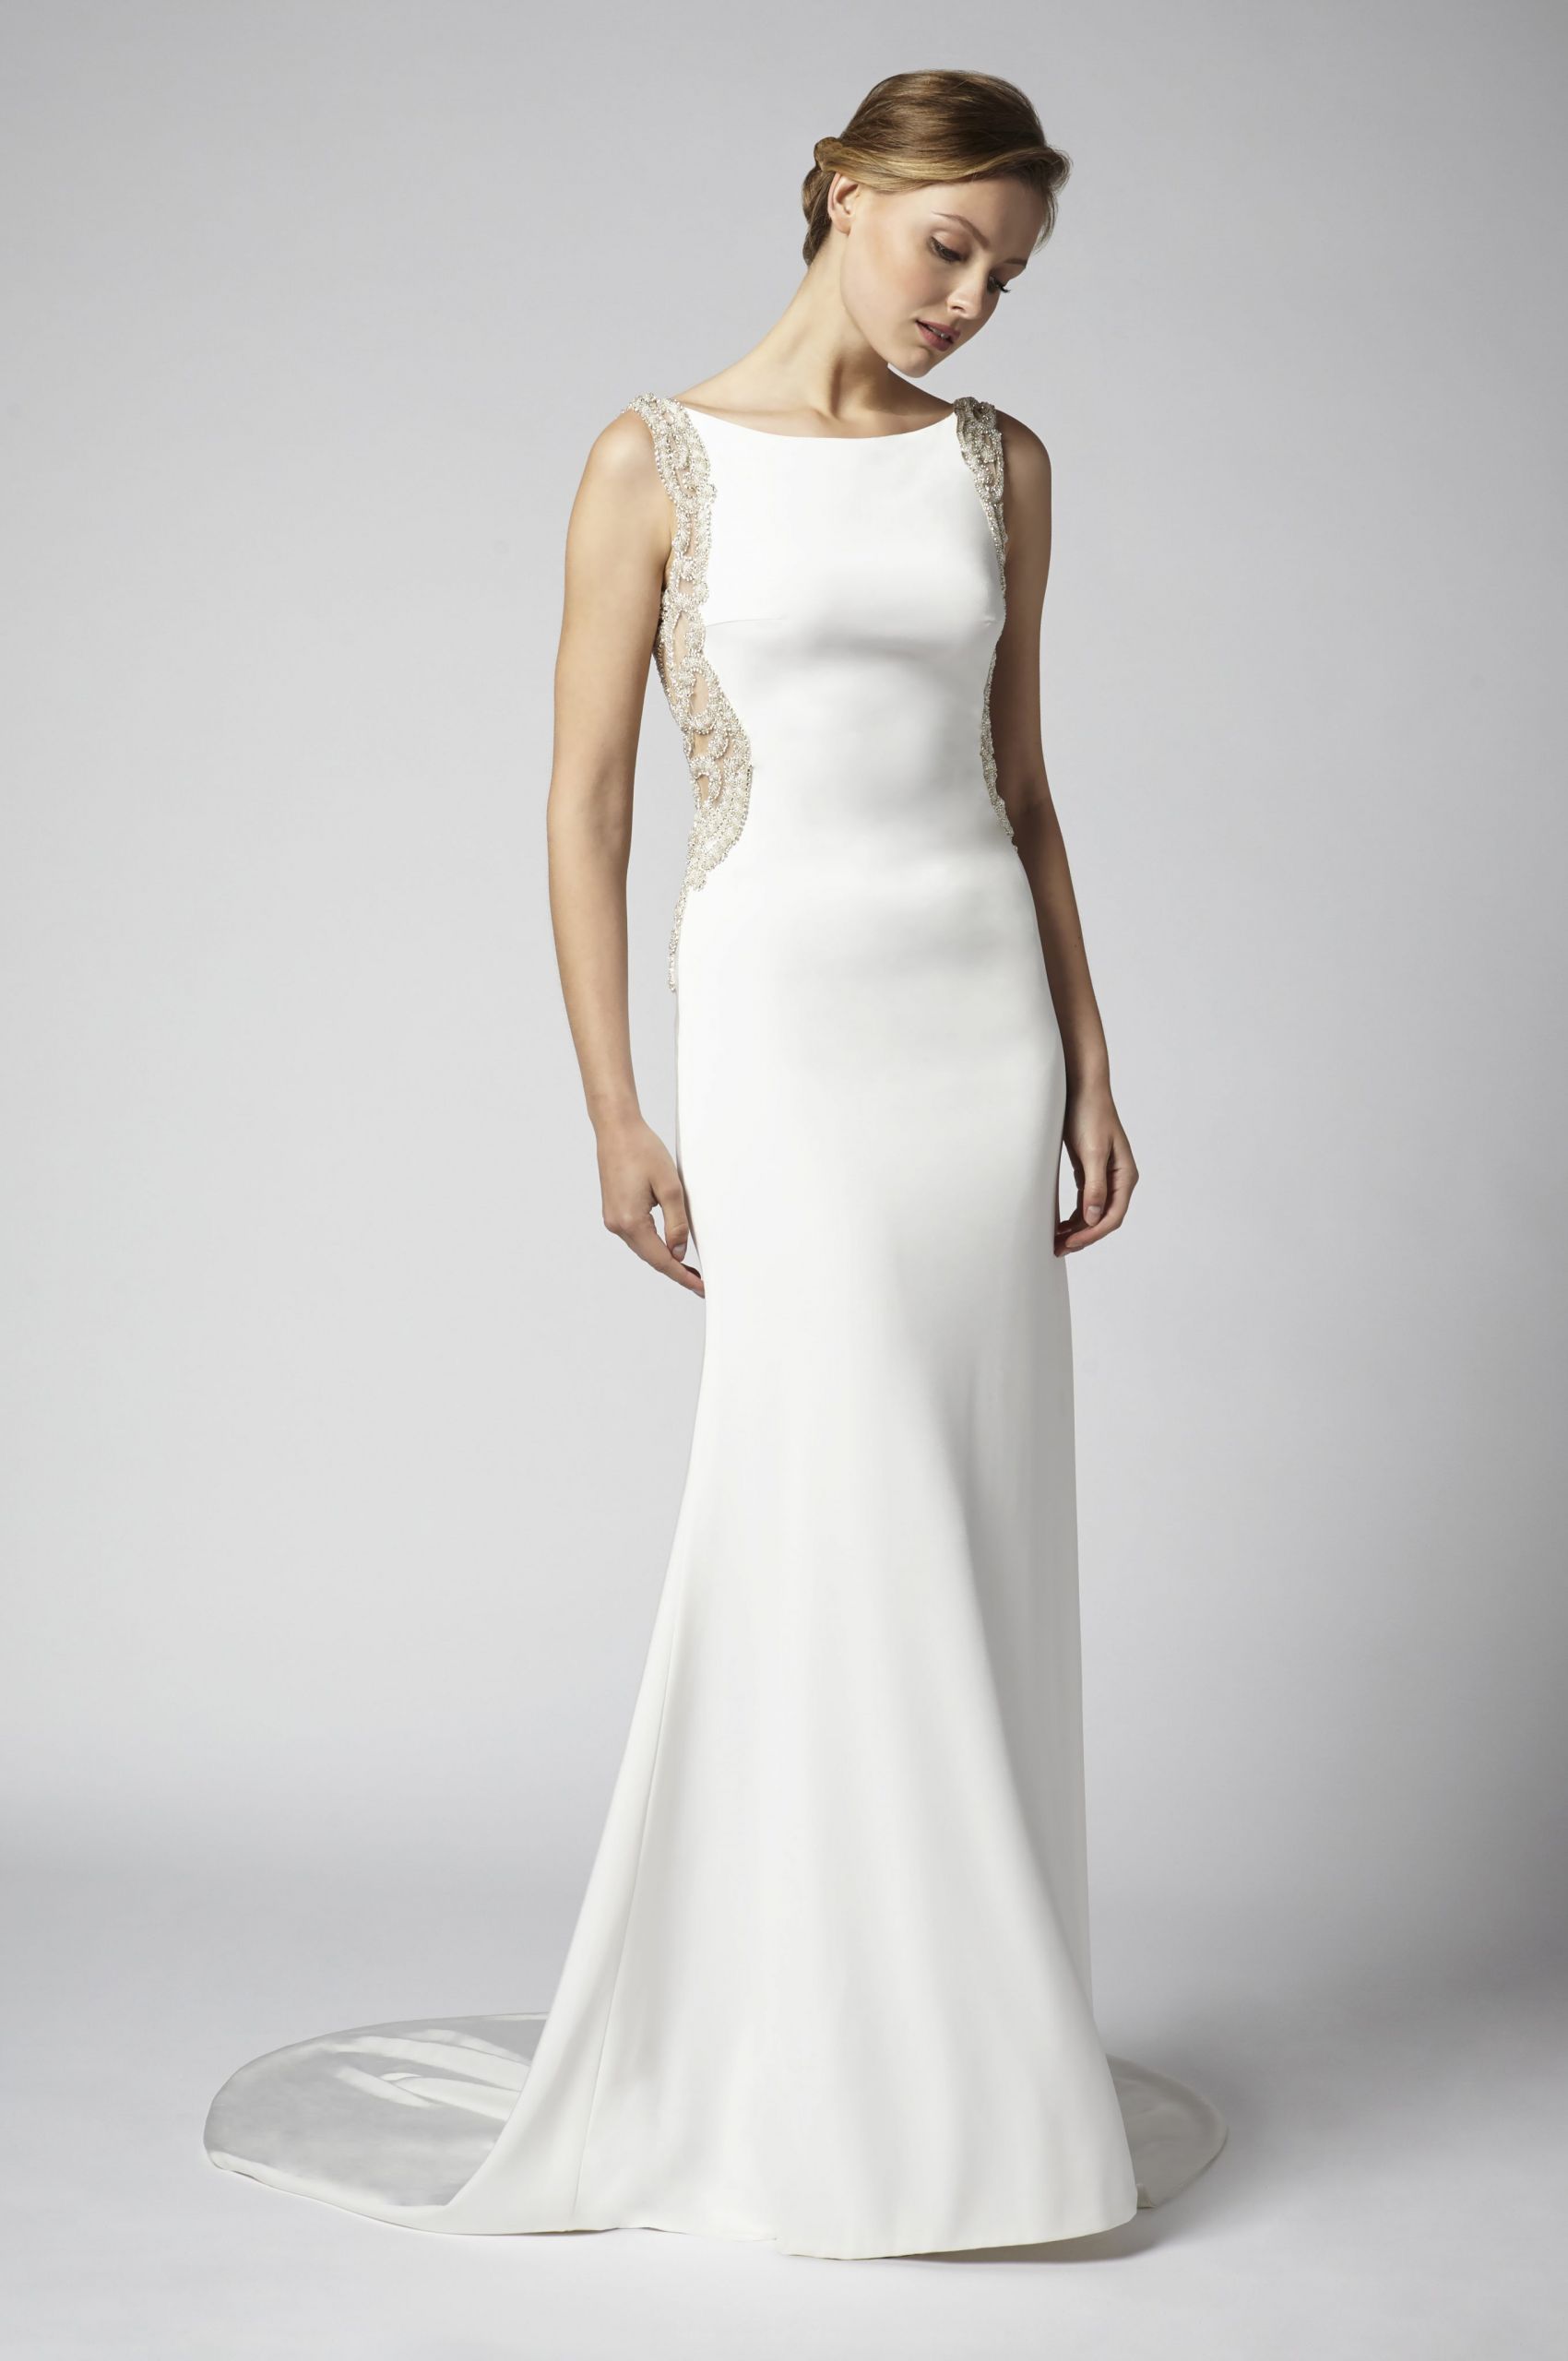 Wedding Gown Images
 Sheath Wedding Dress With Open Back And Beaded